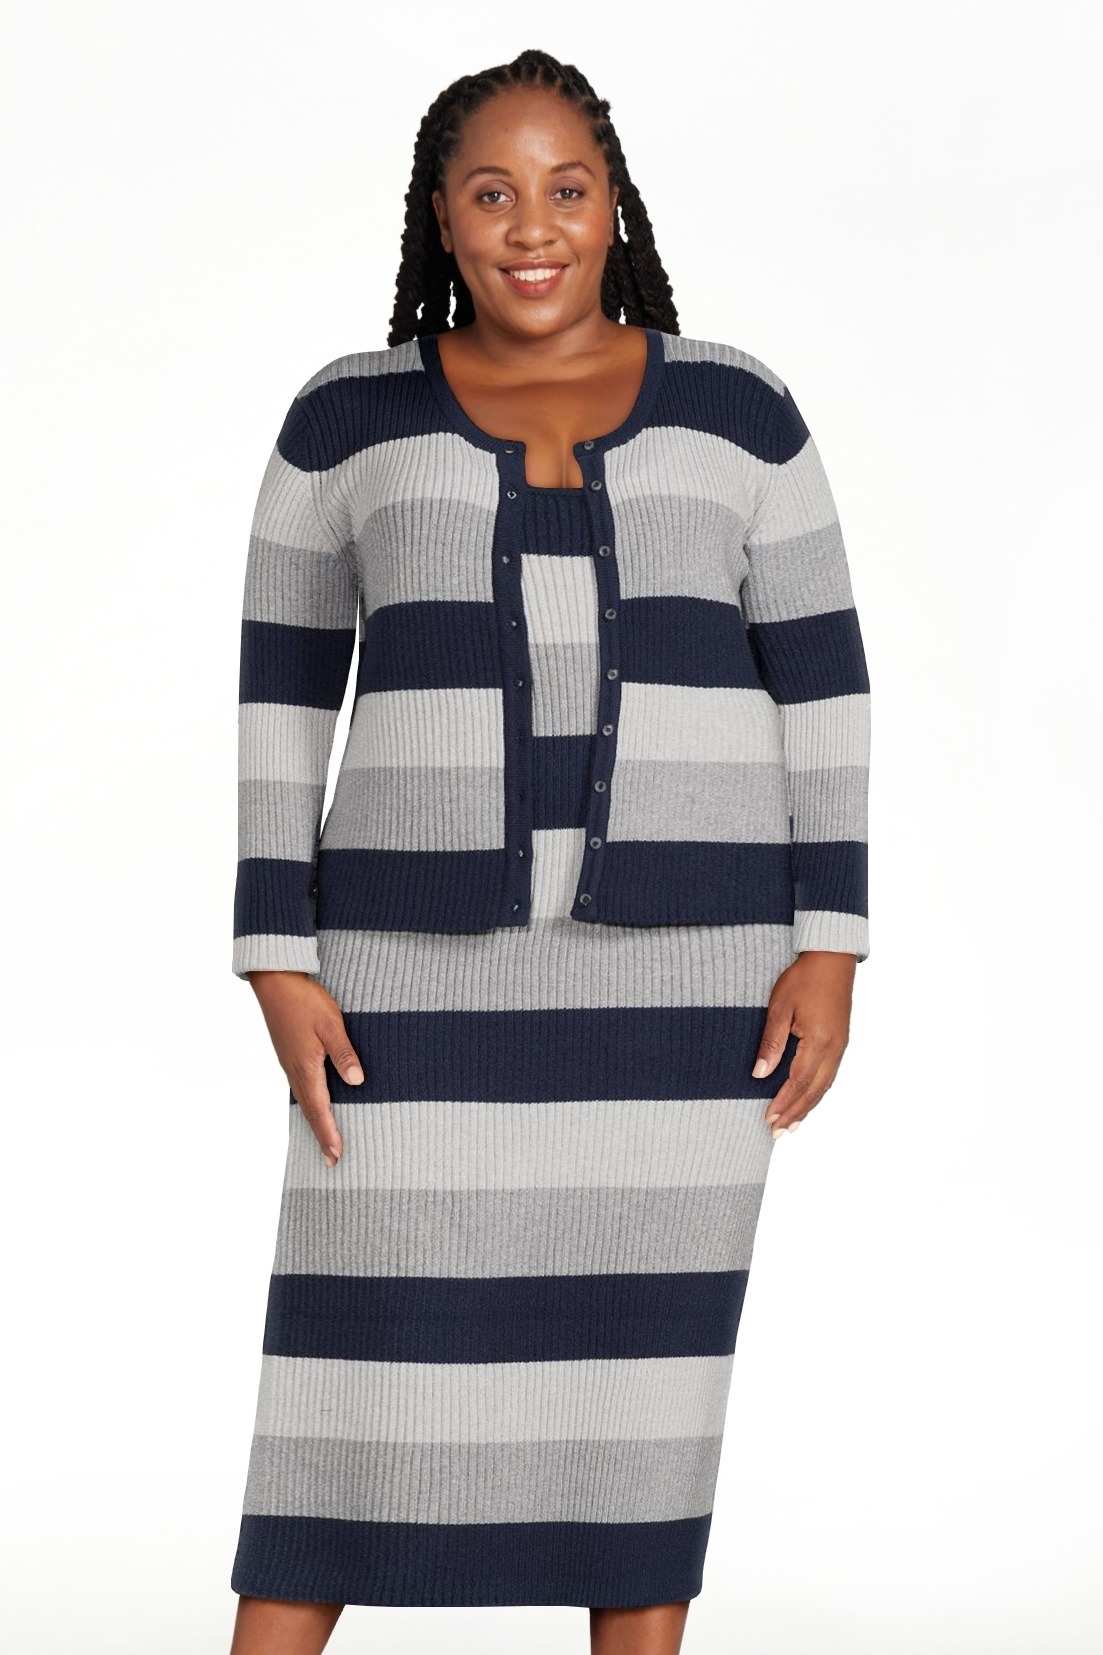 model wearing the blue and white striped dress set with cardigan